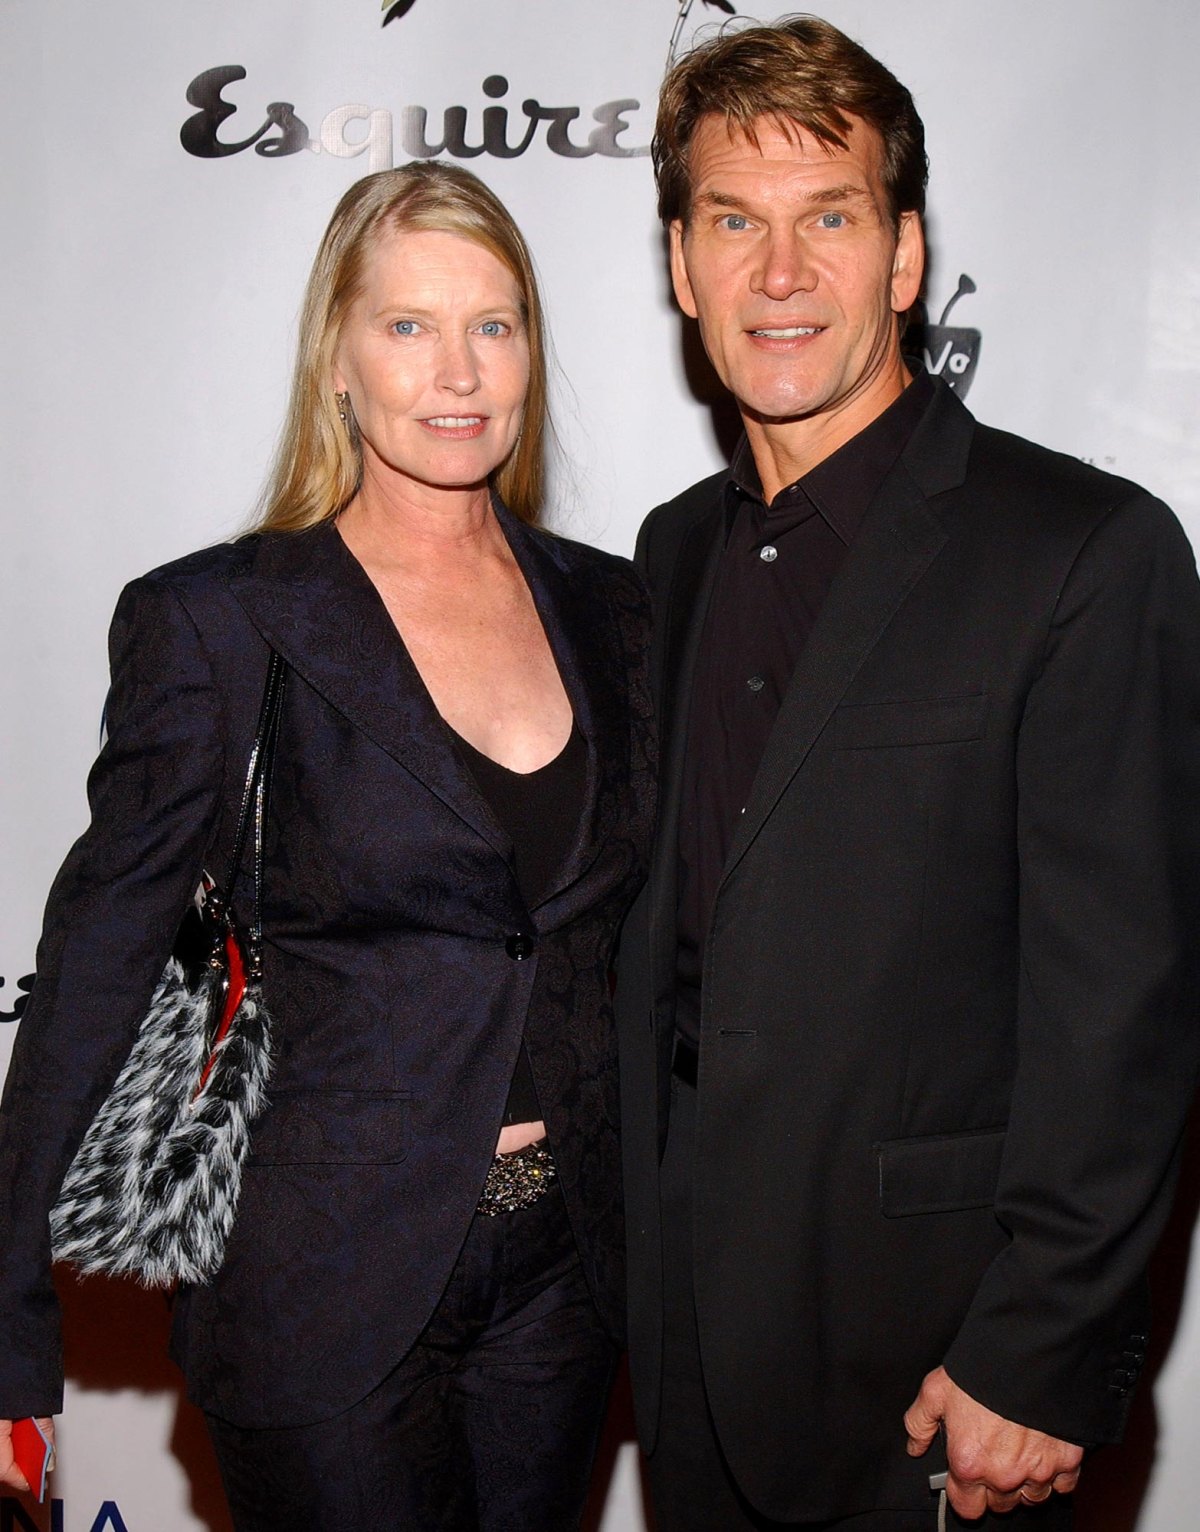 Patrick Swayzes Widow Lisa Niemi Faced Criticism For 2nd Marriage Us Weekly 